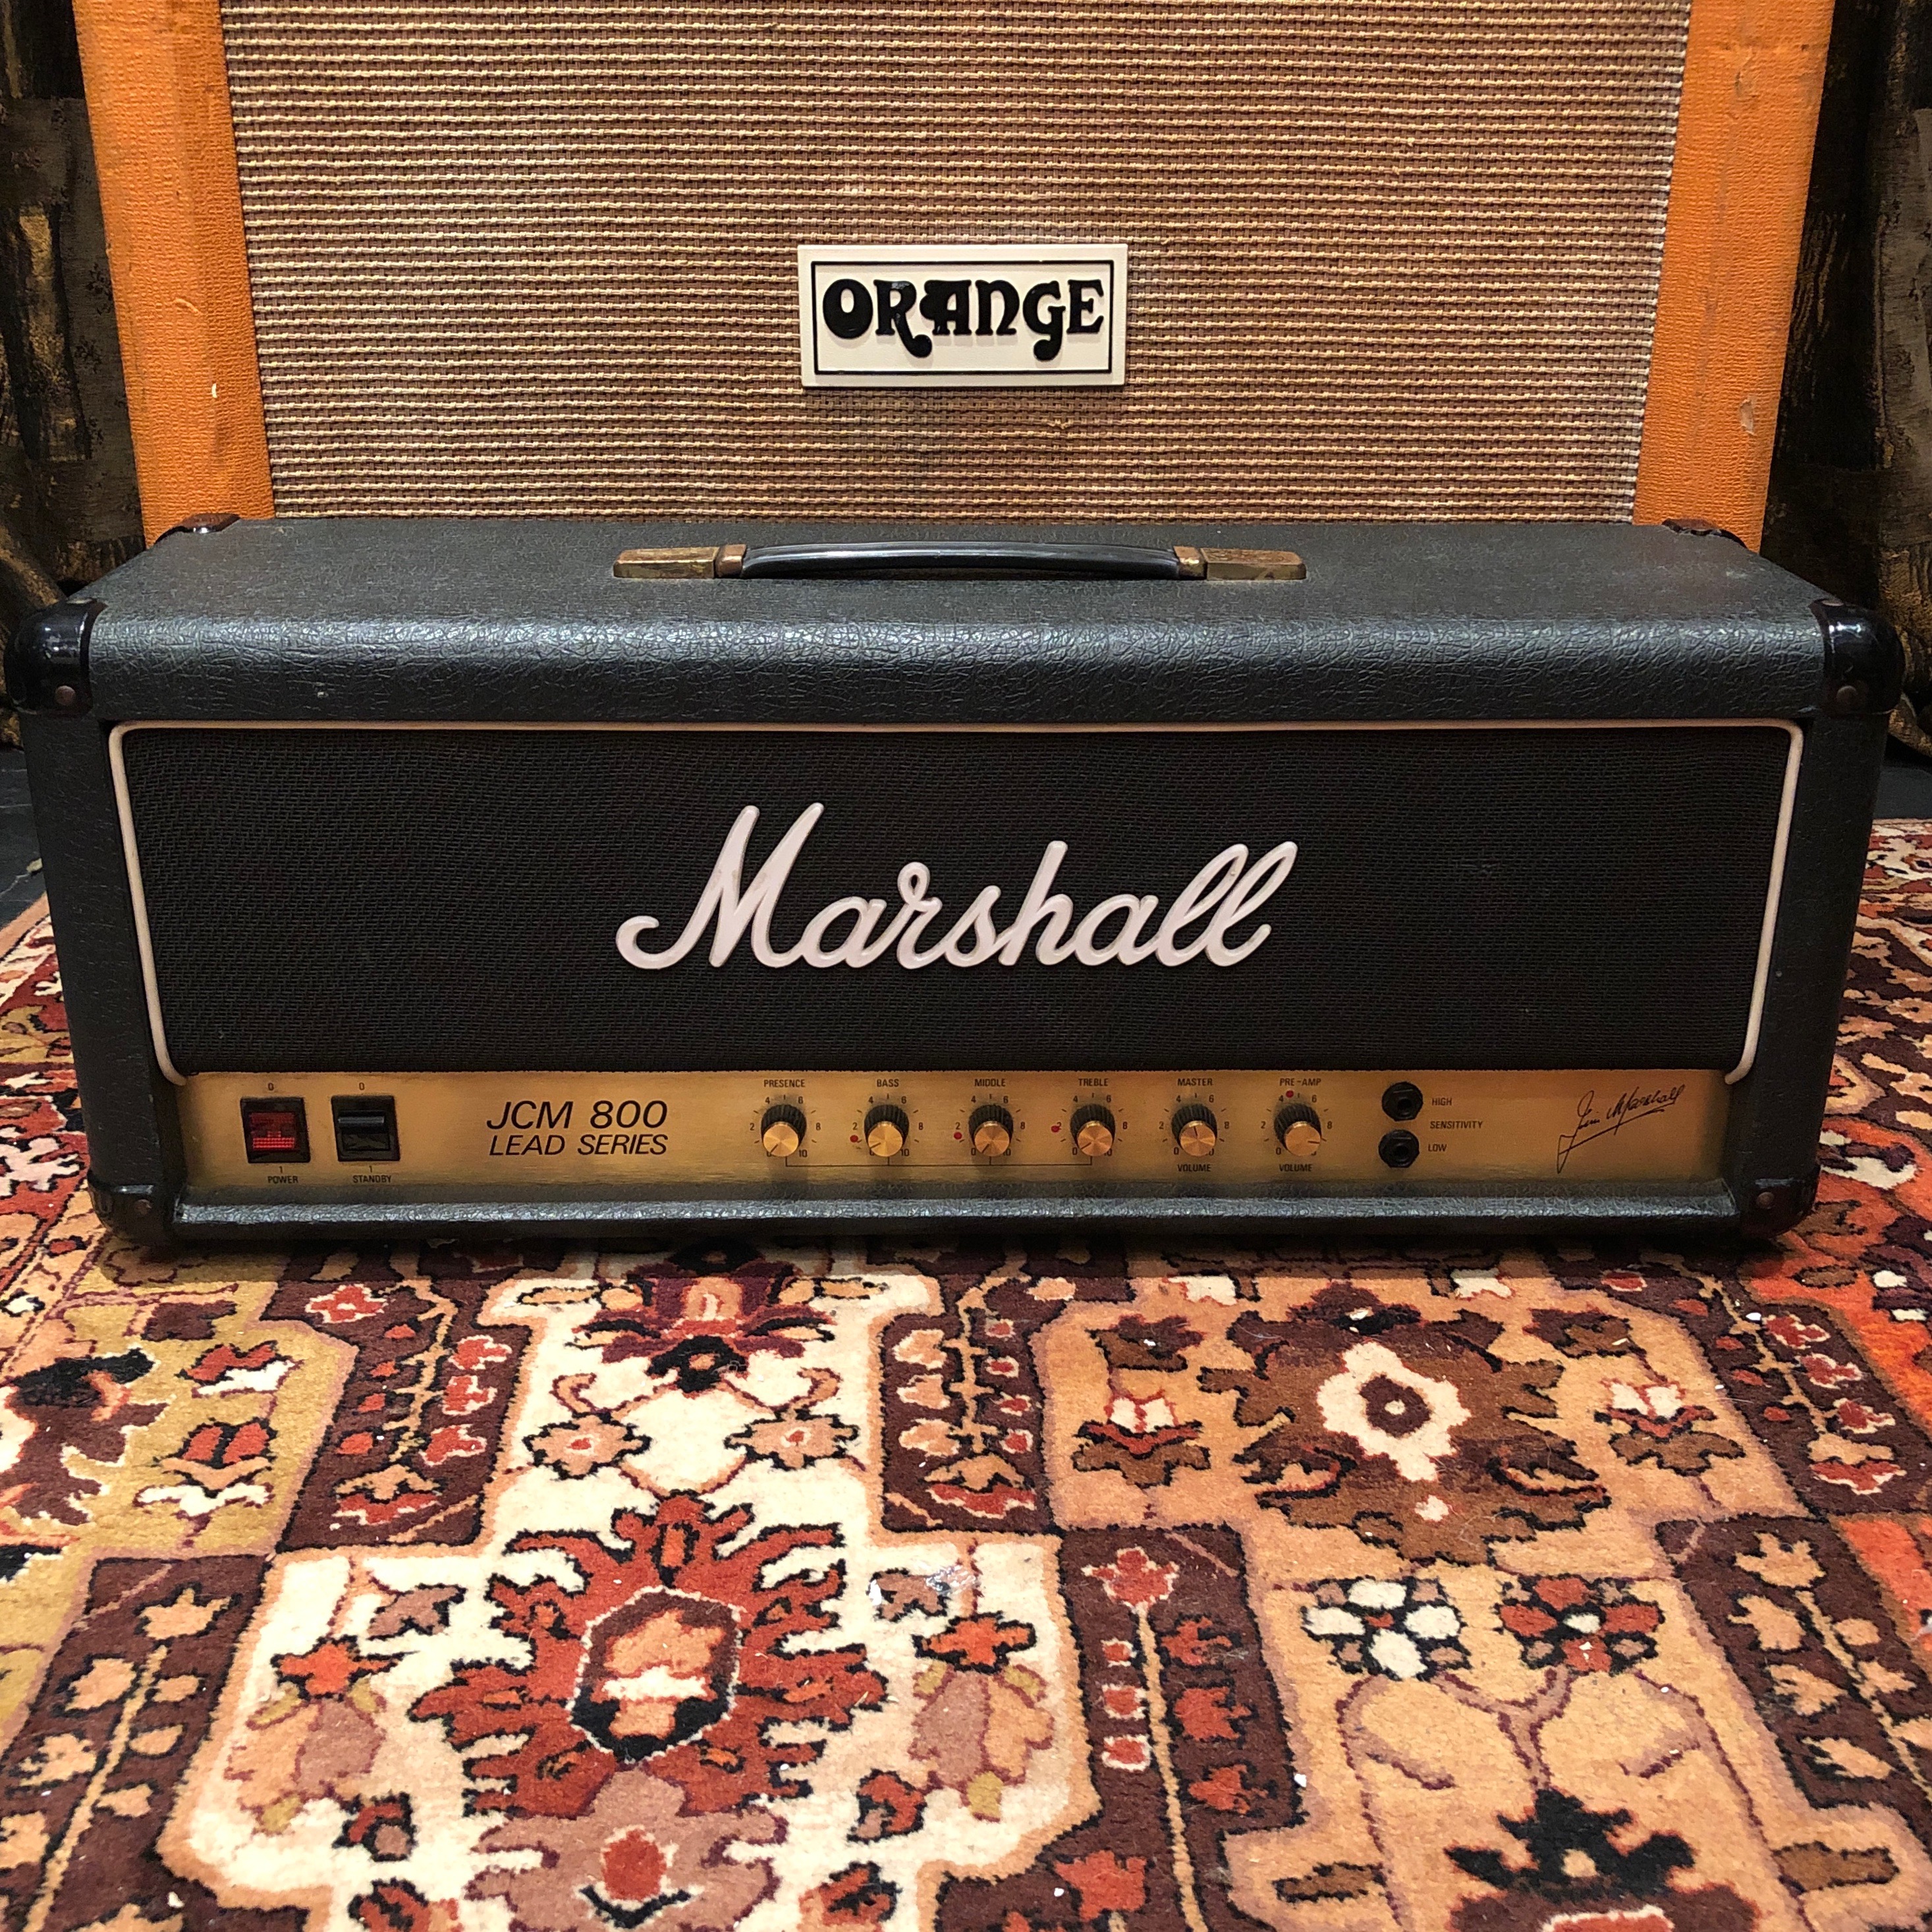 Dating marshall amplifiers